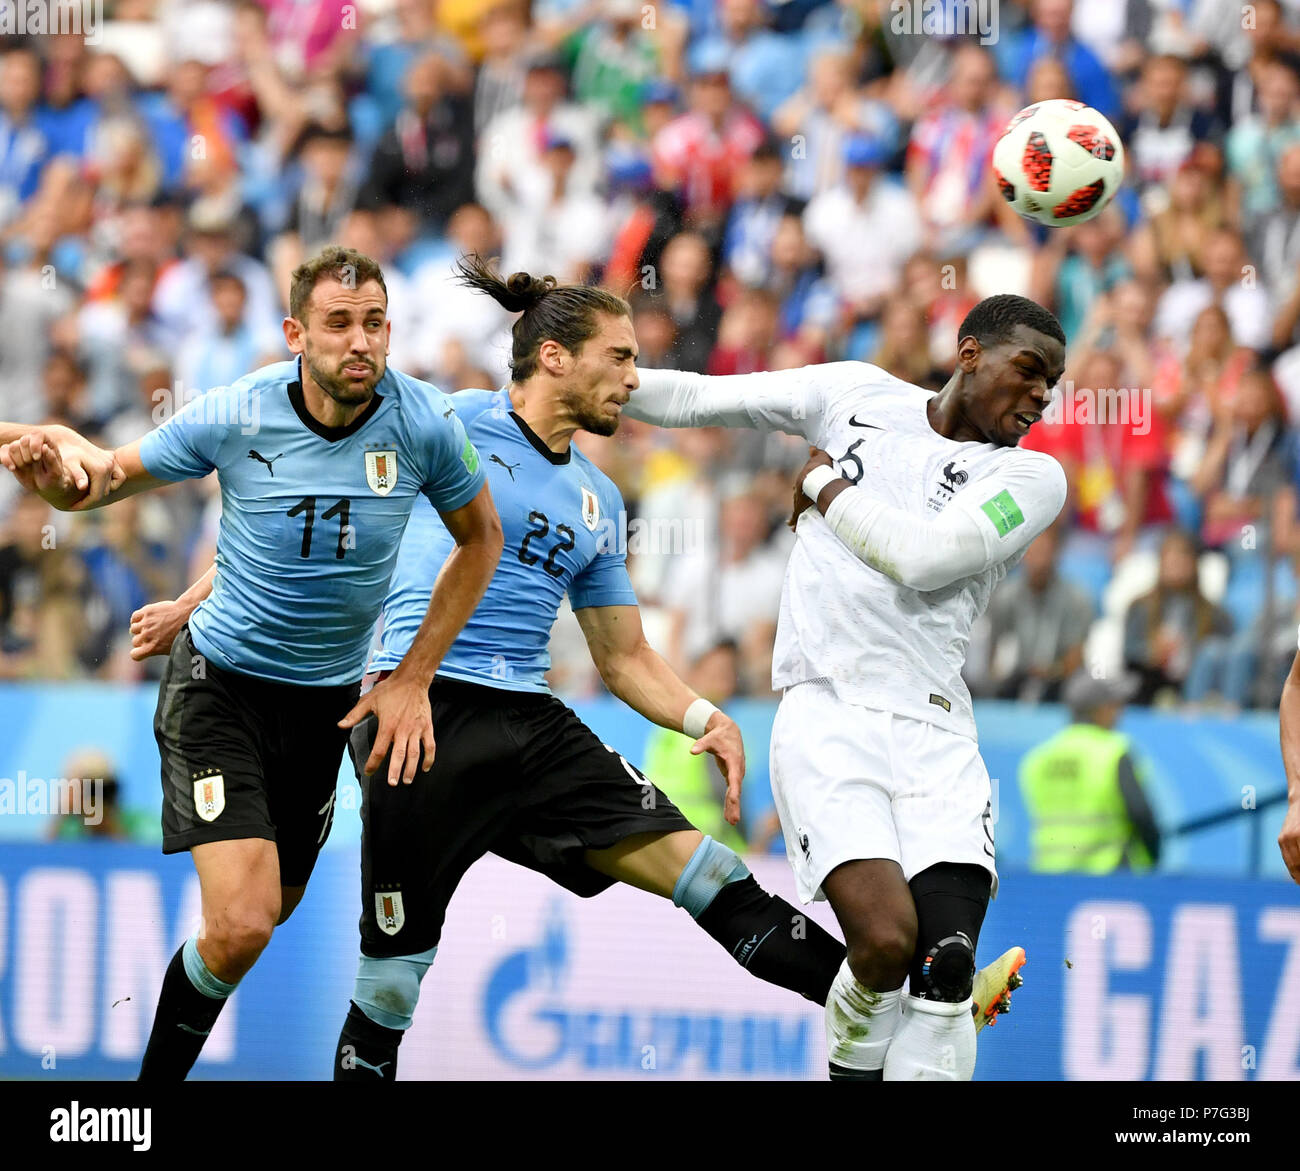 Nizhny Novgorod, Russia. 6th July, 2018. Martin Caceres (C) of Uruguay competes for a header with Paul Pogba (R) of France during the 2018 FIFA World Cup quarter-final match between Uruguay and France in Nizhny Novgorod, Russia, July 6, 2018. Credit: Liu Dawei/Xinhua/Alamy Live News Stock Photo